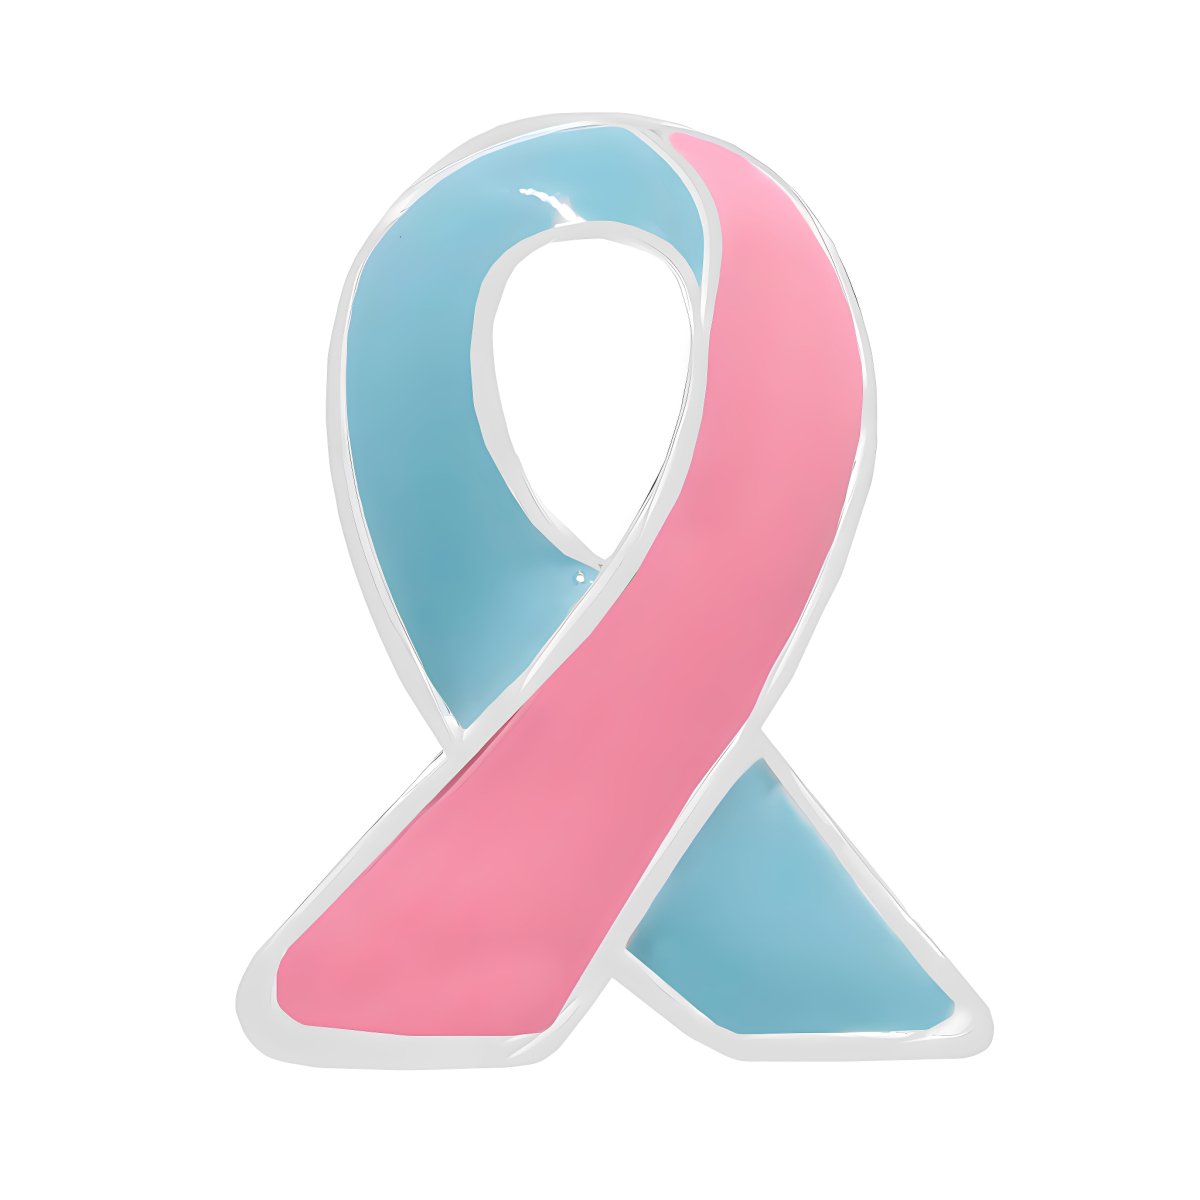 SIDS Awareness Lapel Pins - Fundraising For A Cause